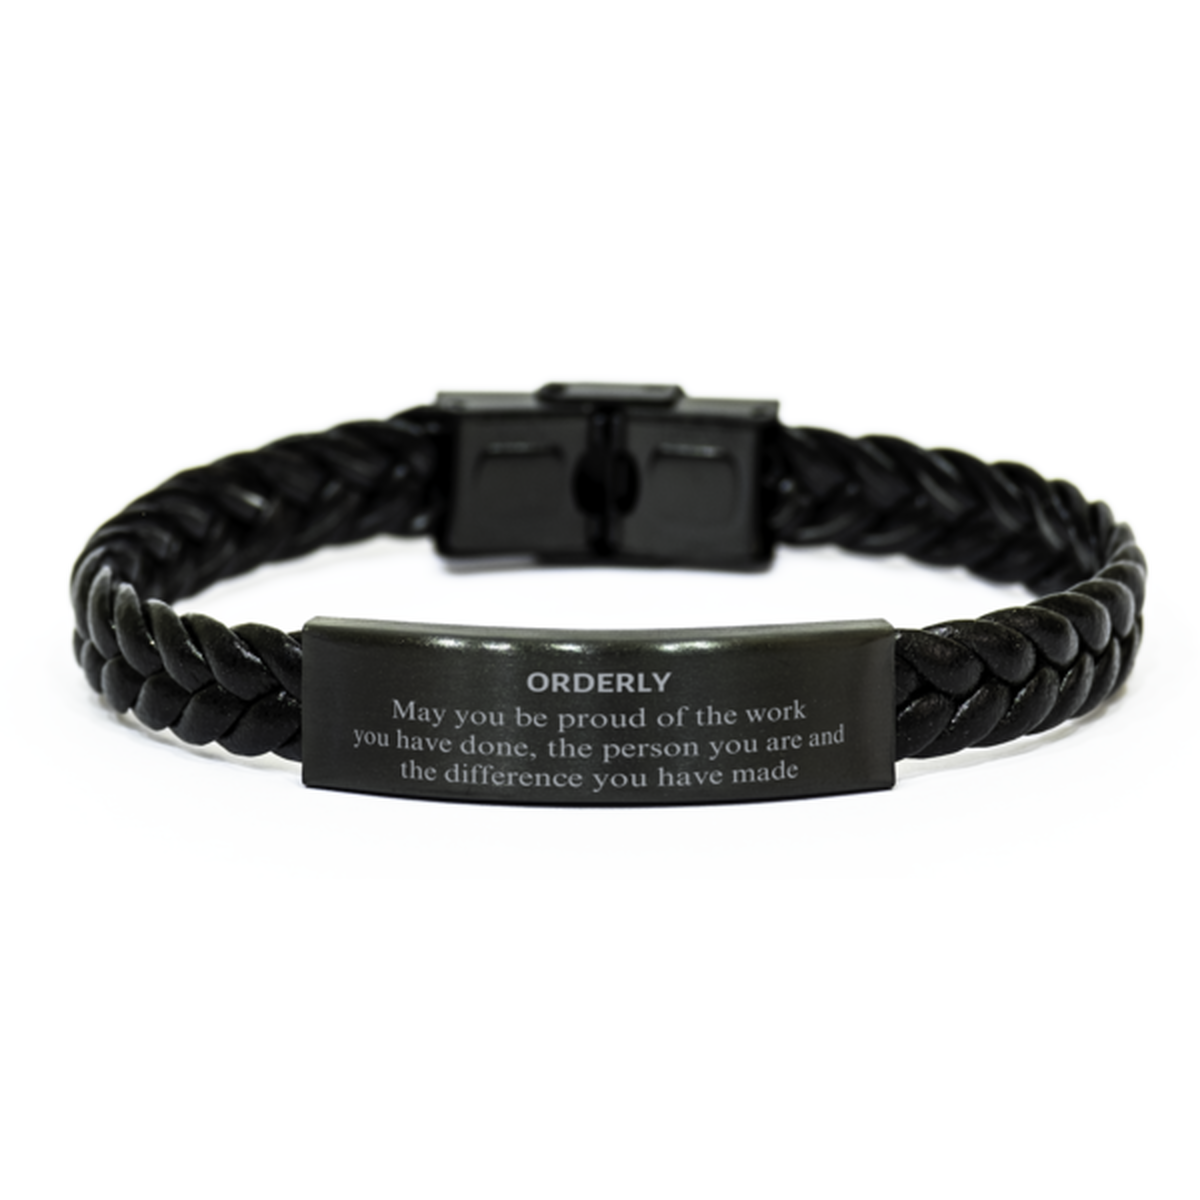 Orderly May you be proud of the work you have done, Retirement Orderly Braided Leather Bracelet for Colleague Appreciation Gifts Amazing for Orderly